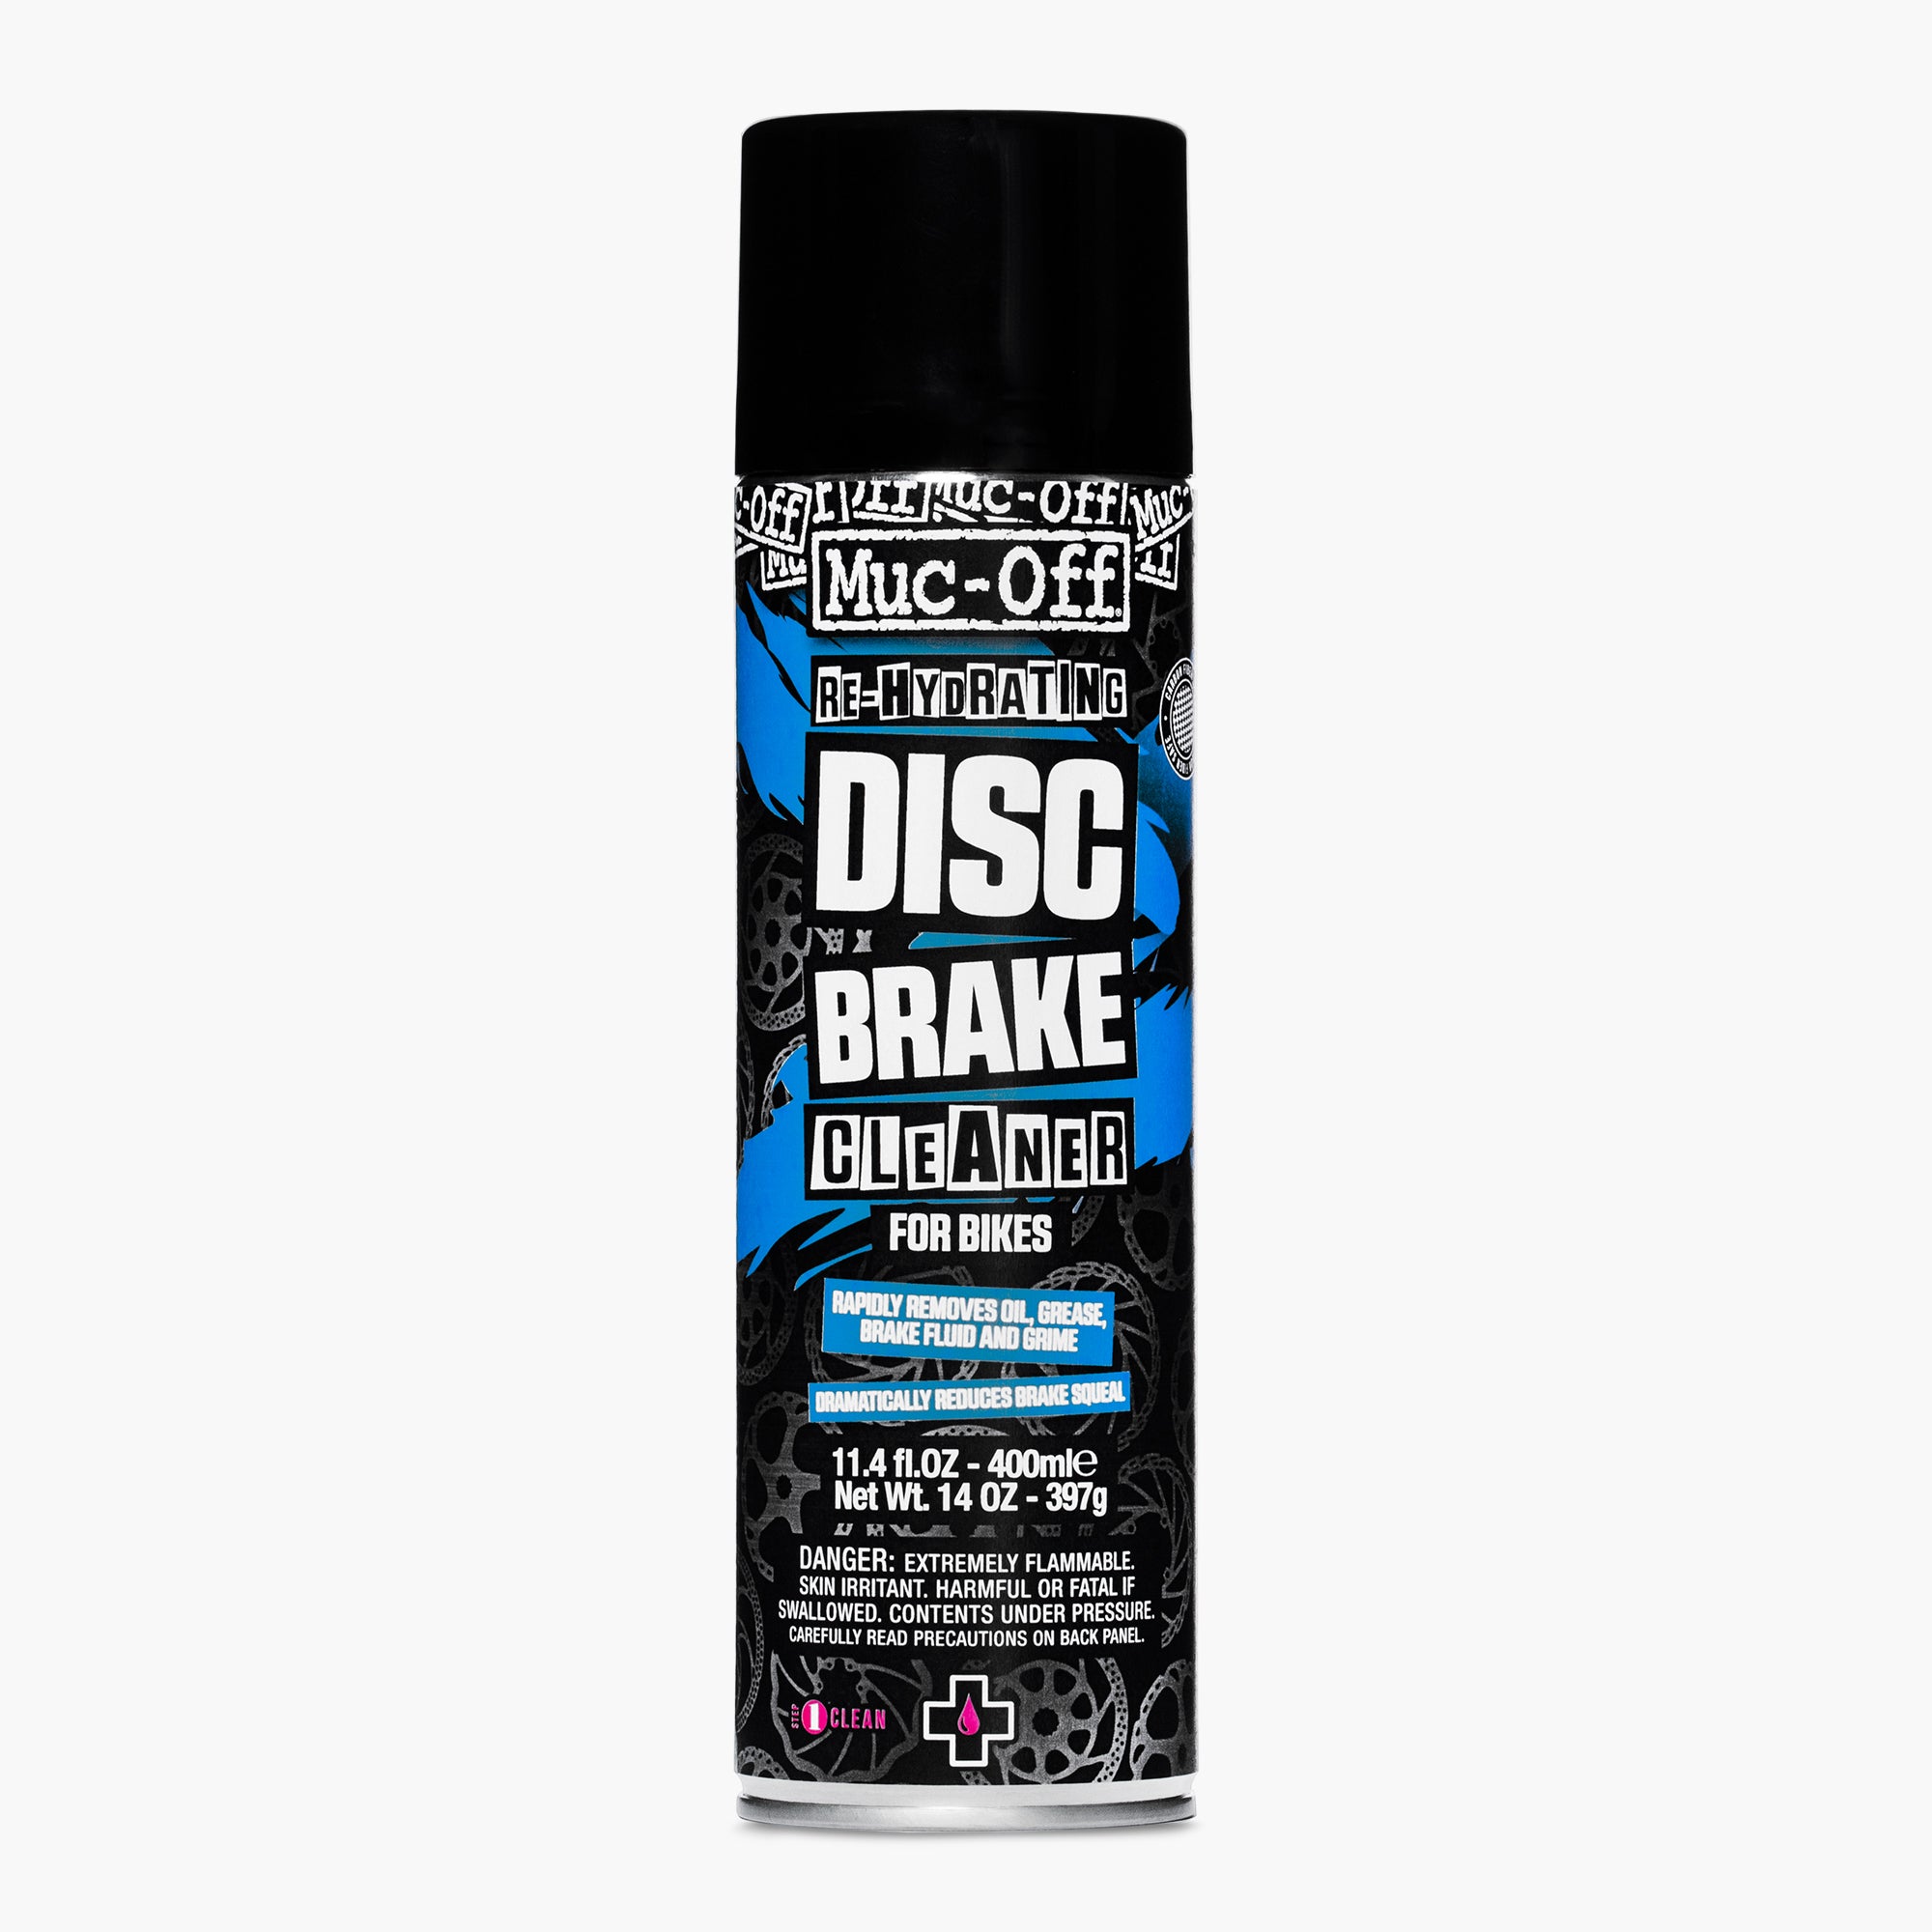 OMAC Brake Caliper Cleaner Spray ABS Disc Cleaner Easy & Quick Cleaning 17  Oz